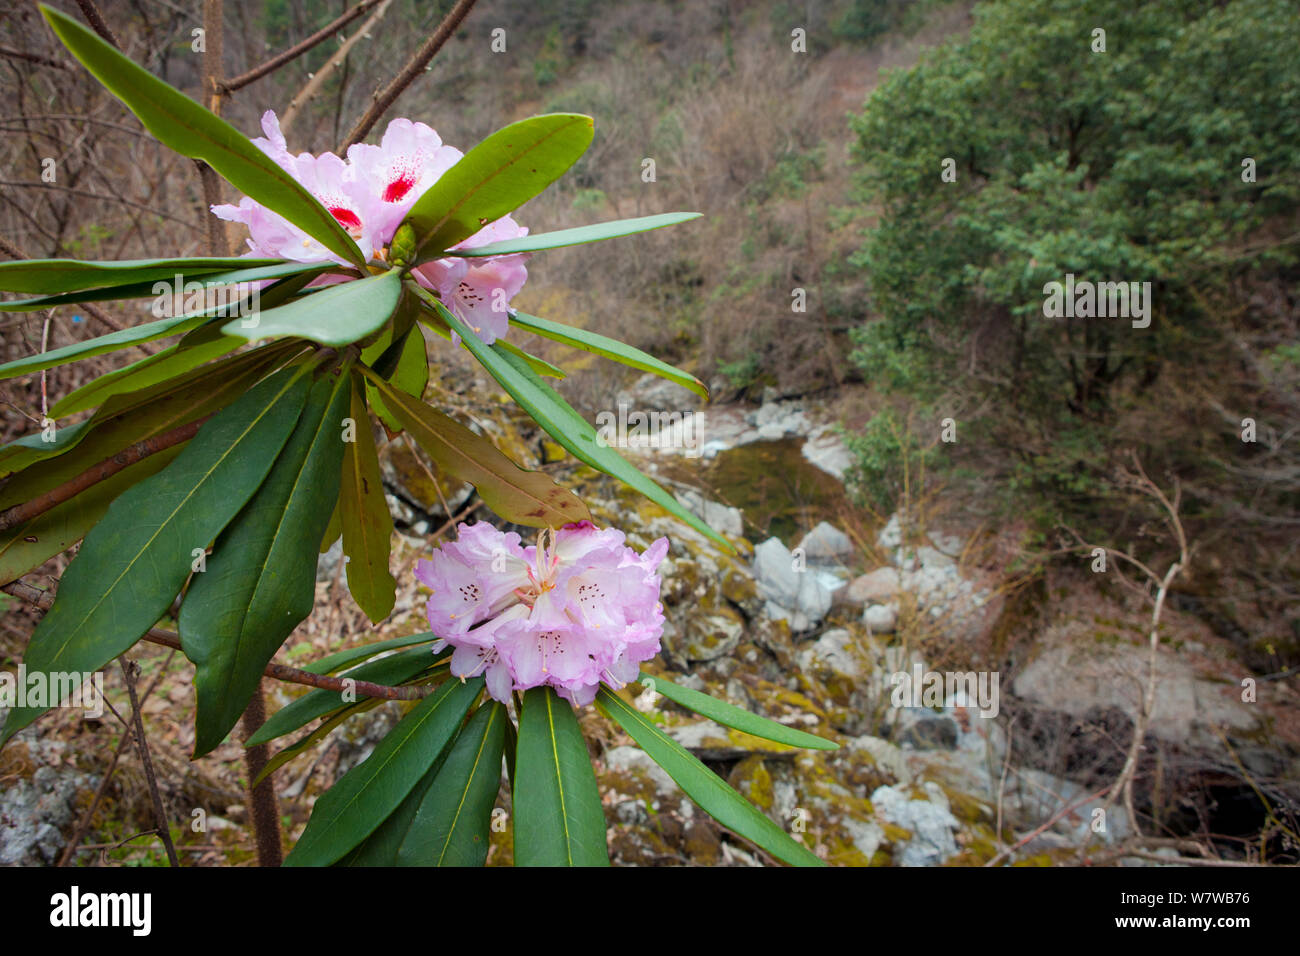 Rhododendron in habitat, Foping Nature Reserve, Qinling Mountains, China. Stock Photo